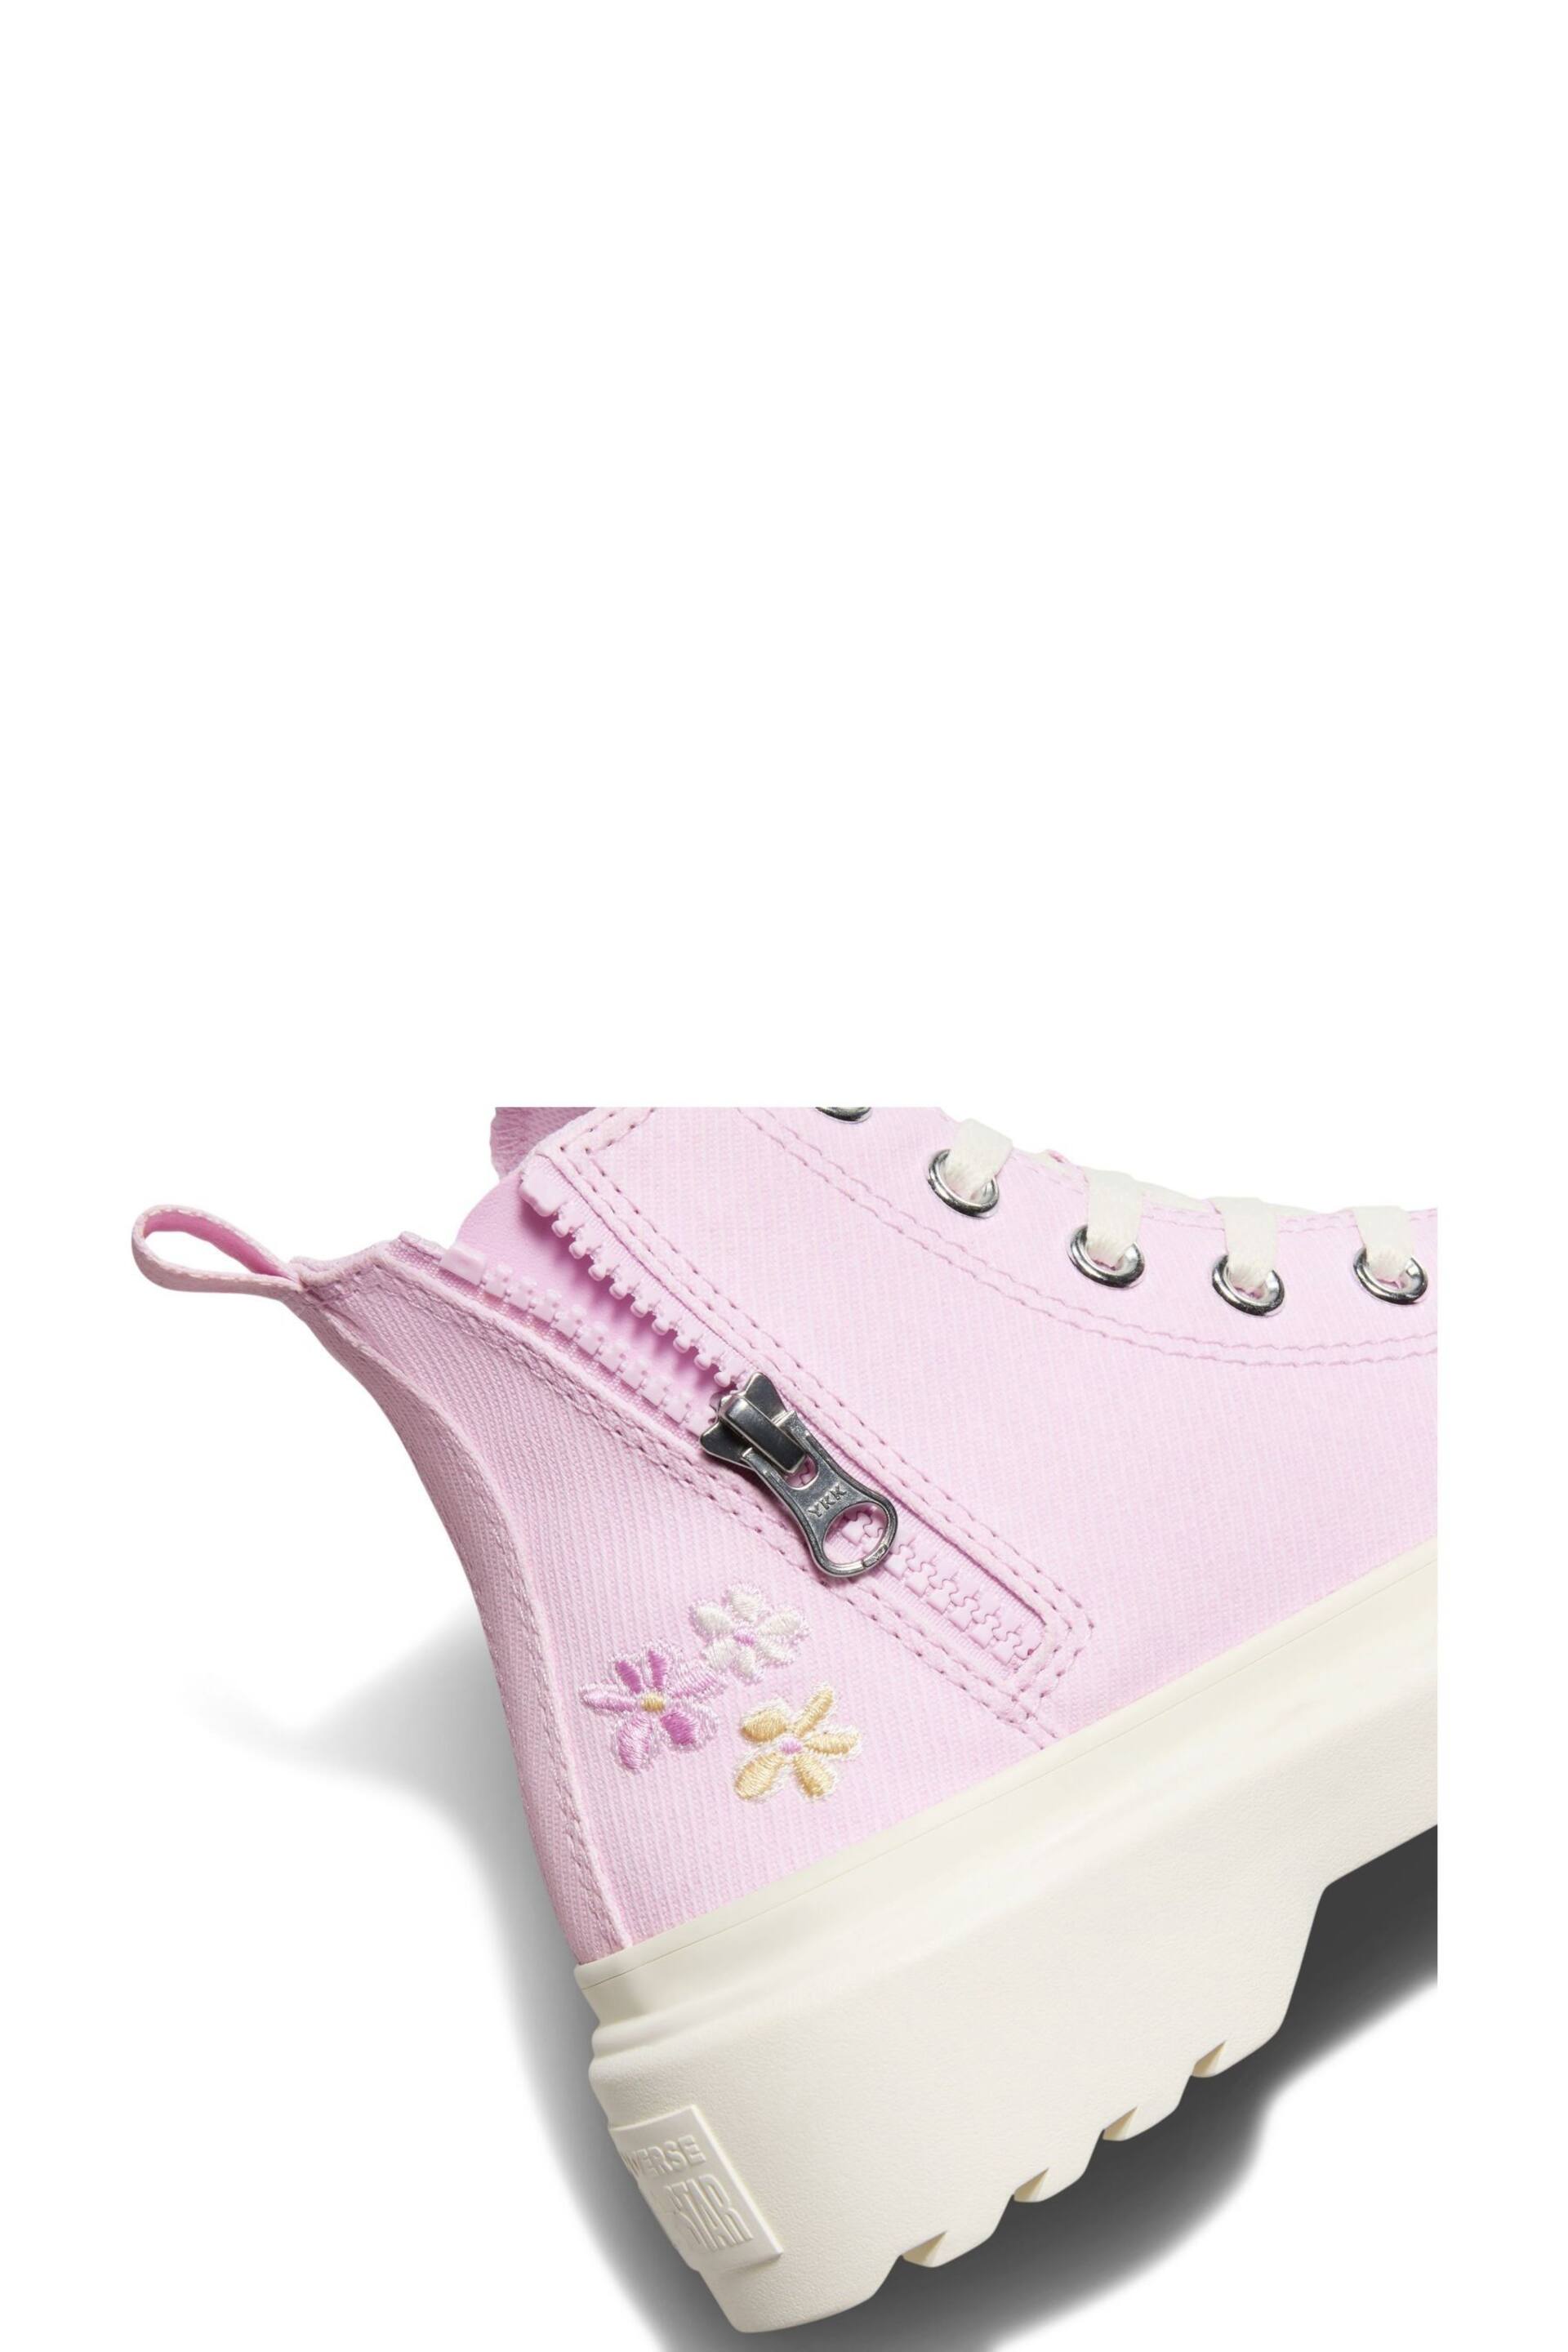 Converse Purple Chuck Taylor Flower Embroidered Lugged Lift Junior Trainers - Image 8 of 12